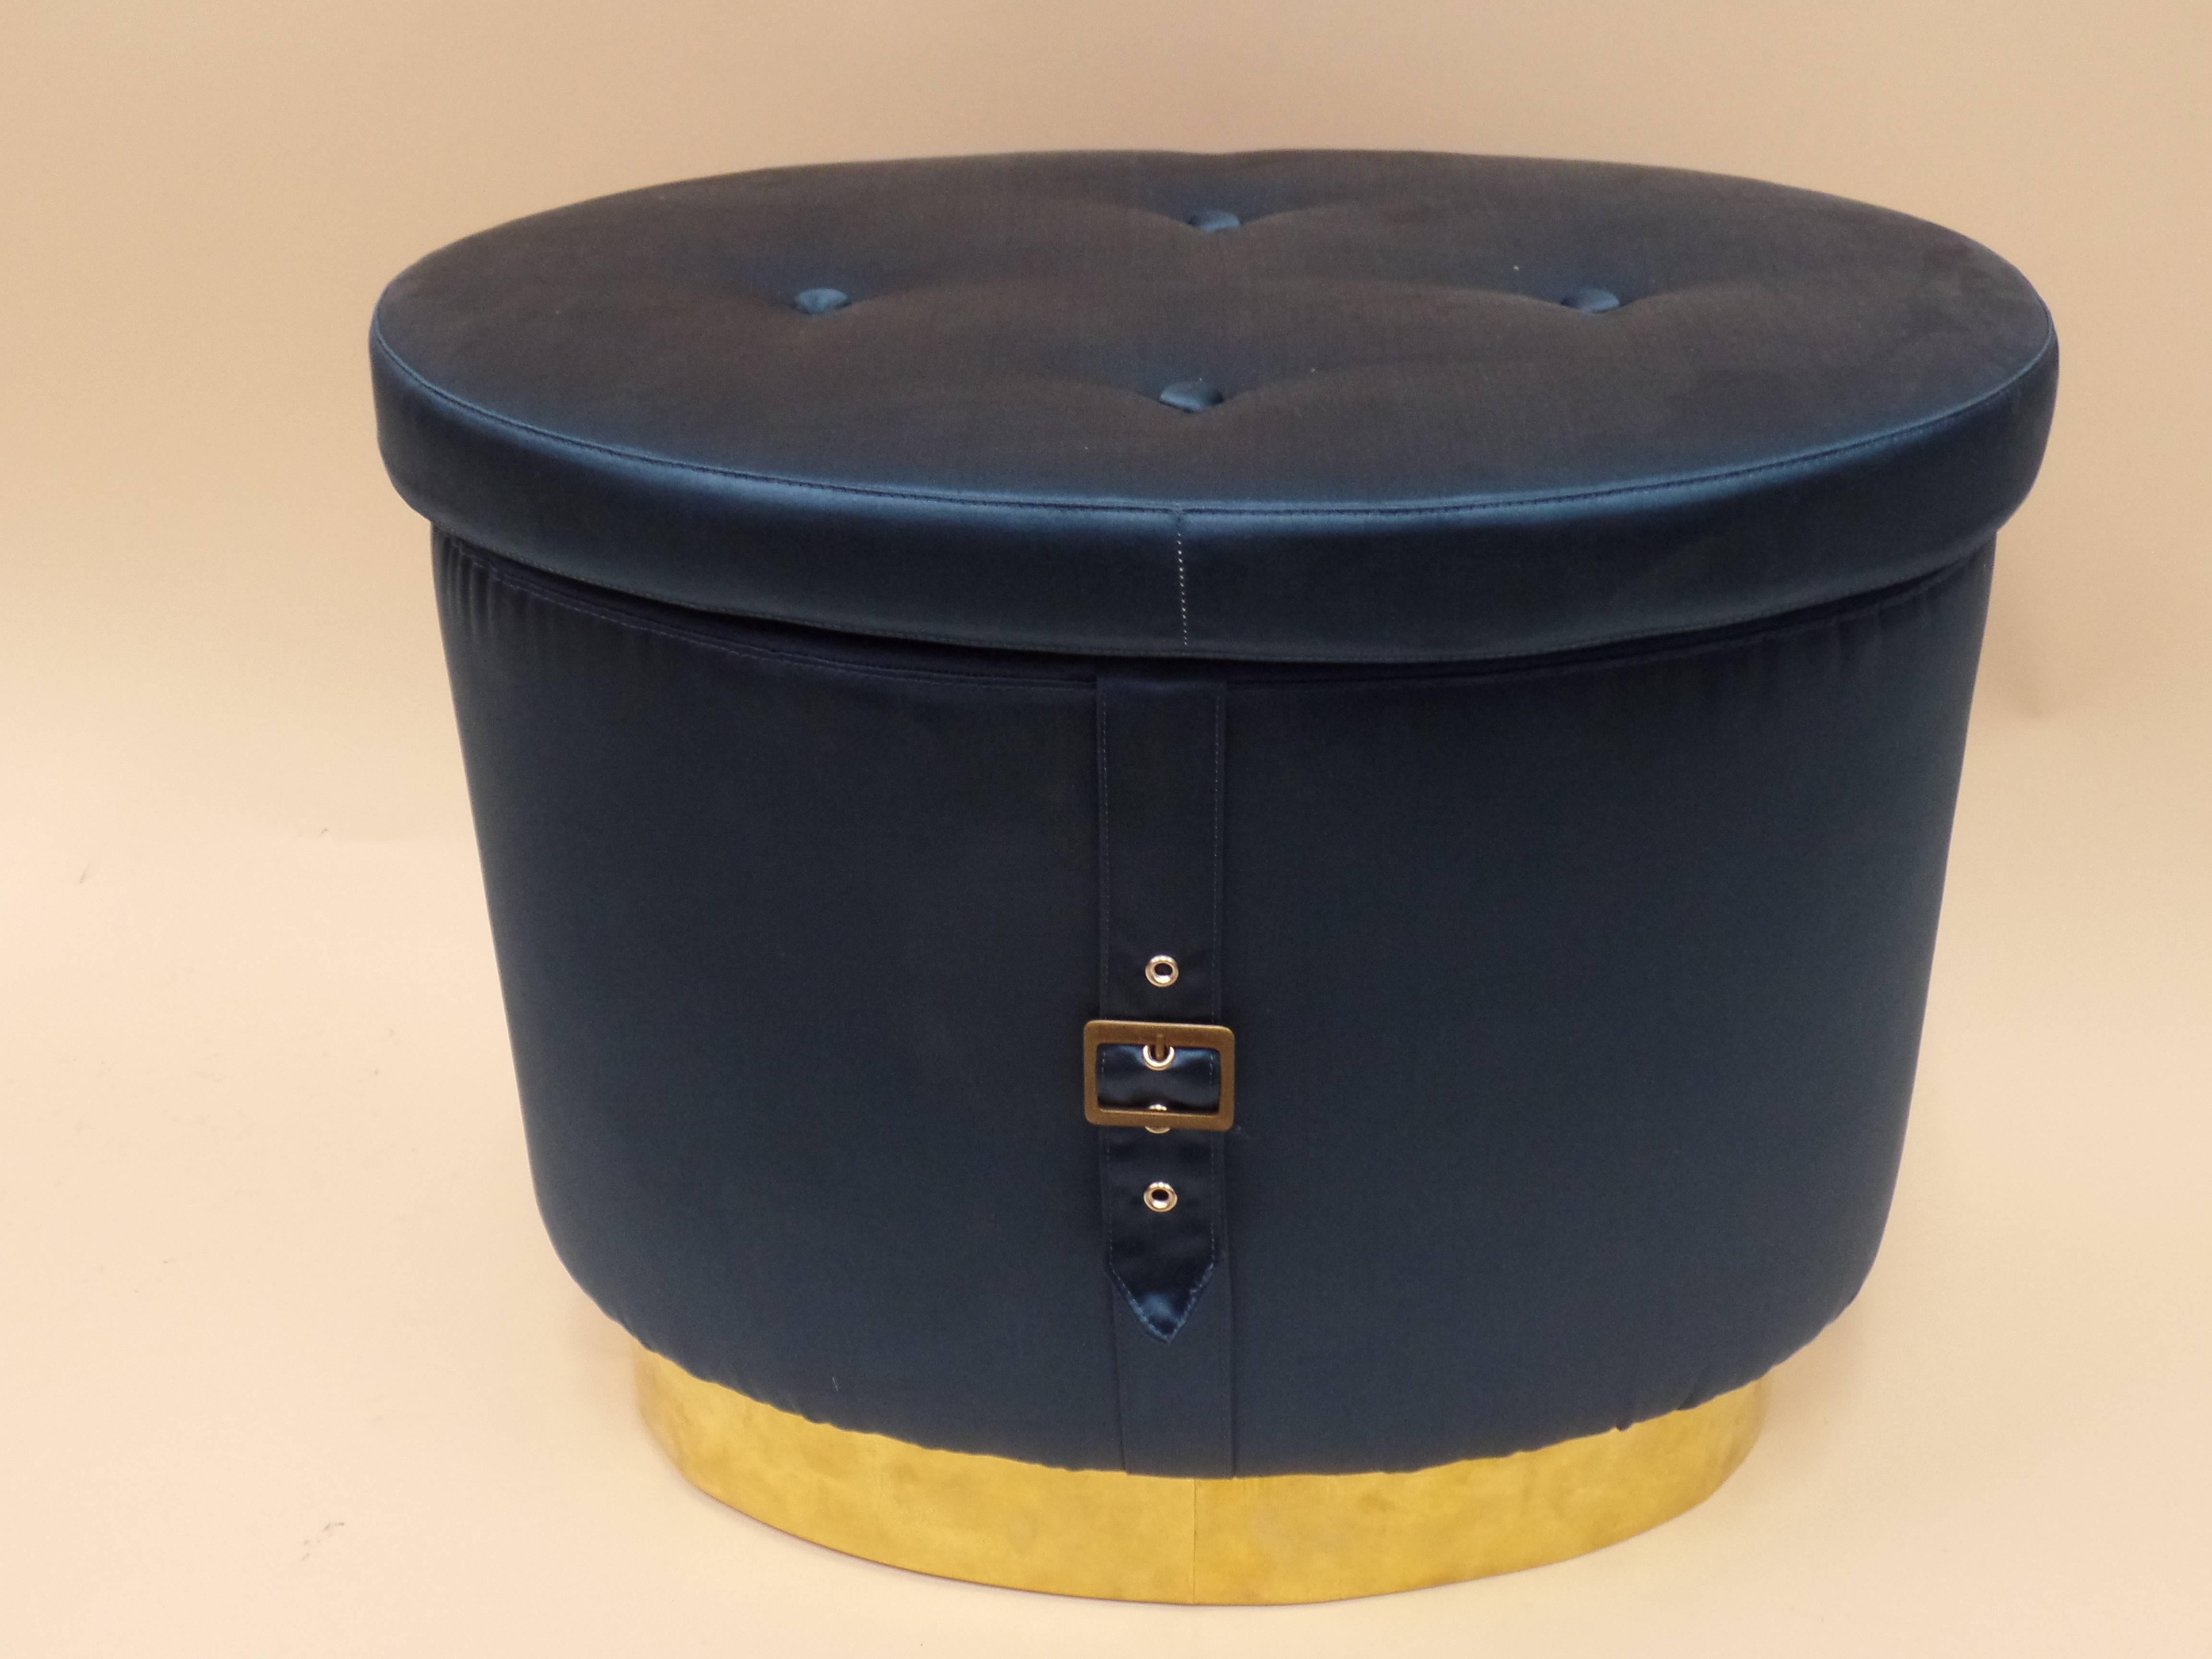 Stunning pair of Italian 1970s oval form stools, ottomans, poofs or benches with a recessed brass base, tufted silk seats and a belt with brass buckle that forms a crest on the central apron!